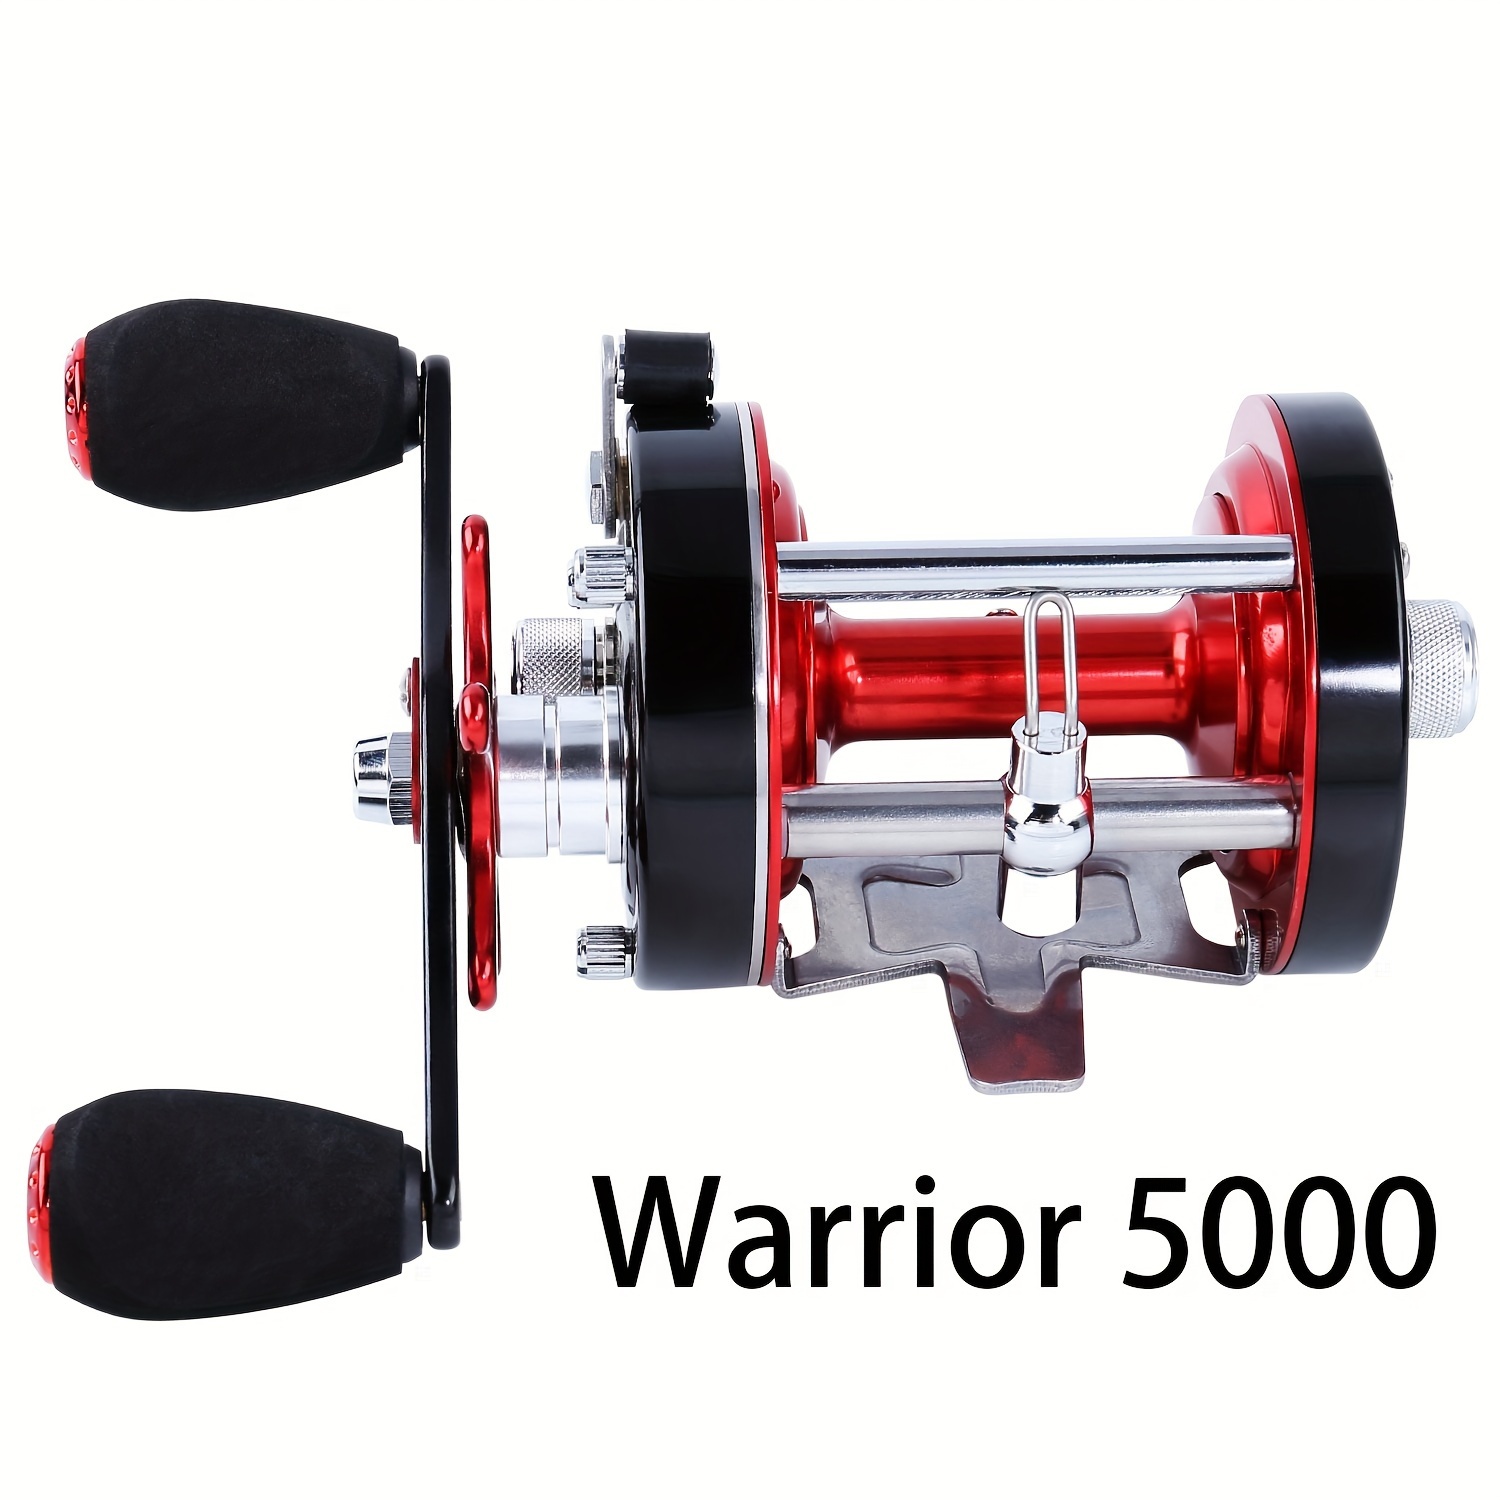 Sougayilang Strong Fishing Reels, Strong Drag Level Wind Round Baitcasting  Reel Conventional Reel, Right Hand Saltwater Sea Fishing Reel Trolling Fish